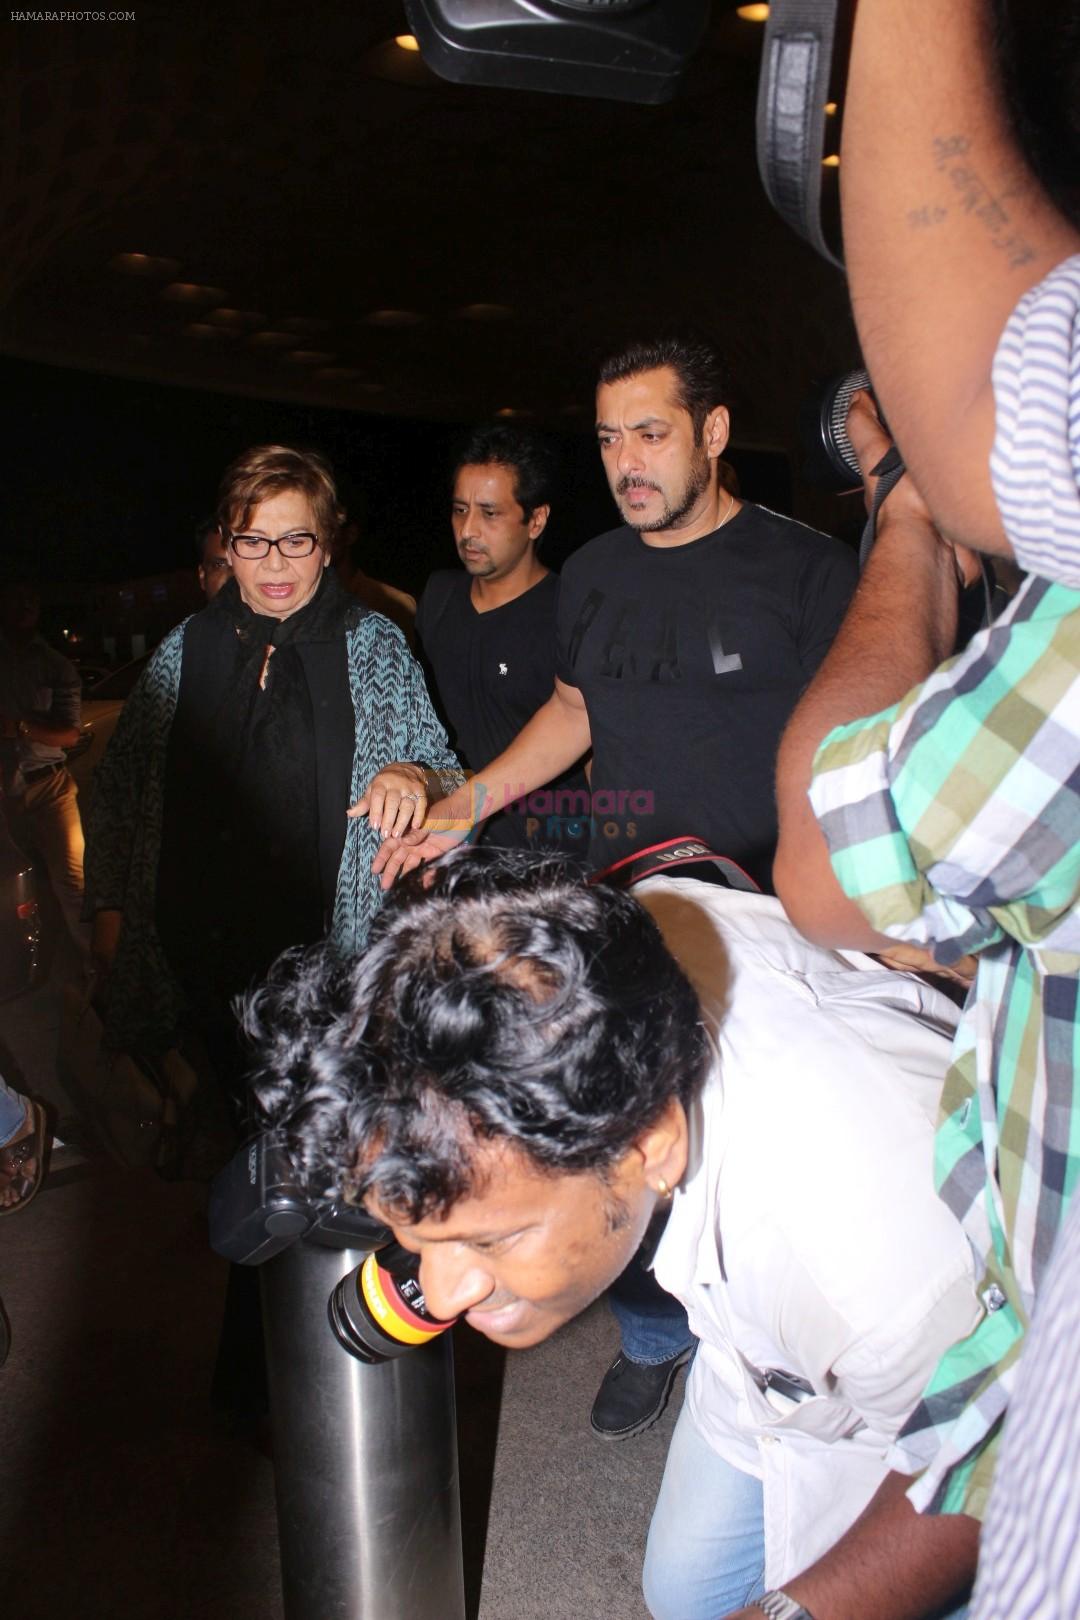 Salman Khan snapped in Mumbai airport leaving For IIFA which will held in New York on 11th July 2017